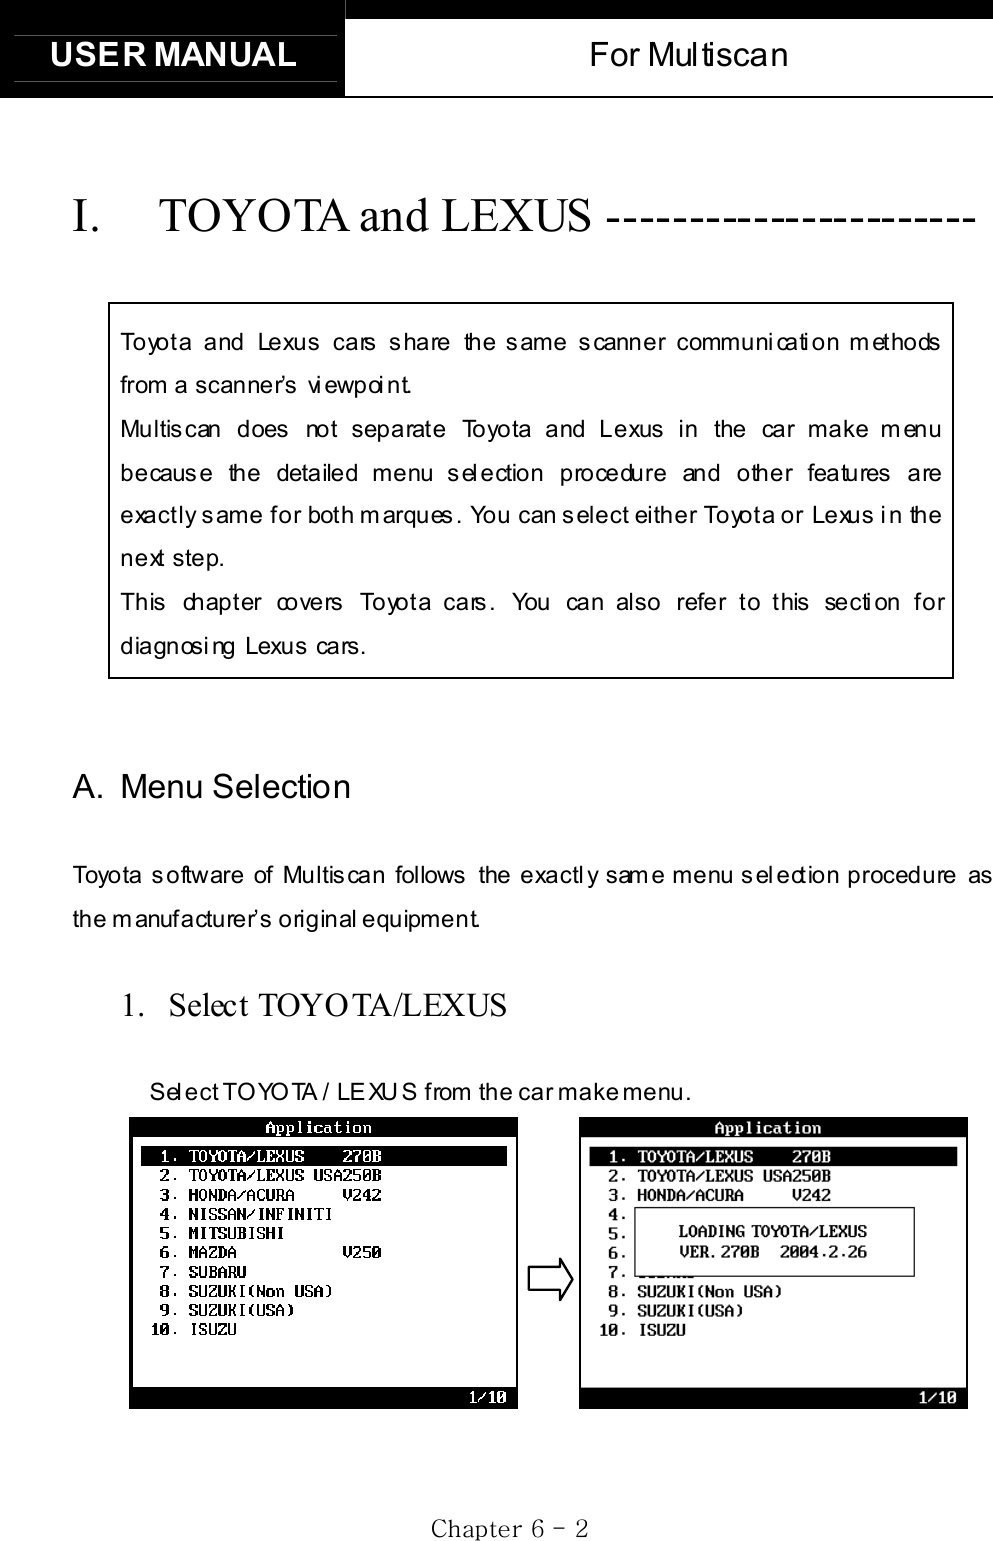 USER MANUAL  For Multiscan GjG]GTG YGI.  TOYOTA and LEXUS ----------------------- Toyota and Lexus cars share the same scanner communication methods from a scanner’s  viewpoint. Multiscan does not separate  Toyota and Lexus in the car make menu because the detailed menu selection procedure and other features are exactly same for both marques. You can select either Toyota or Lexus in the next step. This chapter covers Toyota cars. You can also refer to this section for diagnosing Lexus cars. A. Menu Selection Toyota software of Multiscan follows the exactly same menu selection procedure as   the m anufacturer’s  original equipment.  1. Select TOYOTA/LEXUS Sel ect TO YO TA / LEXU S from the car make menu.              